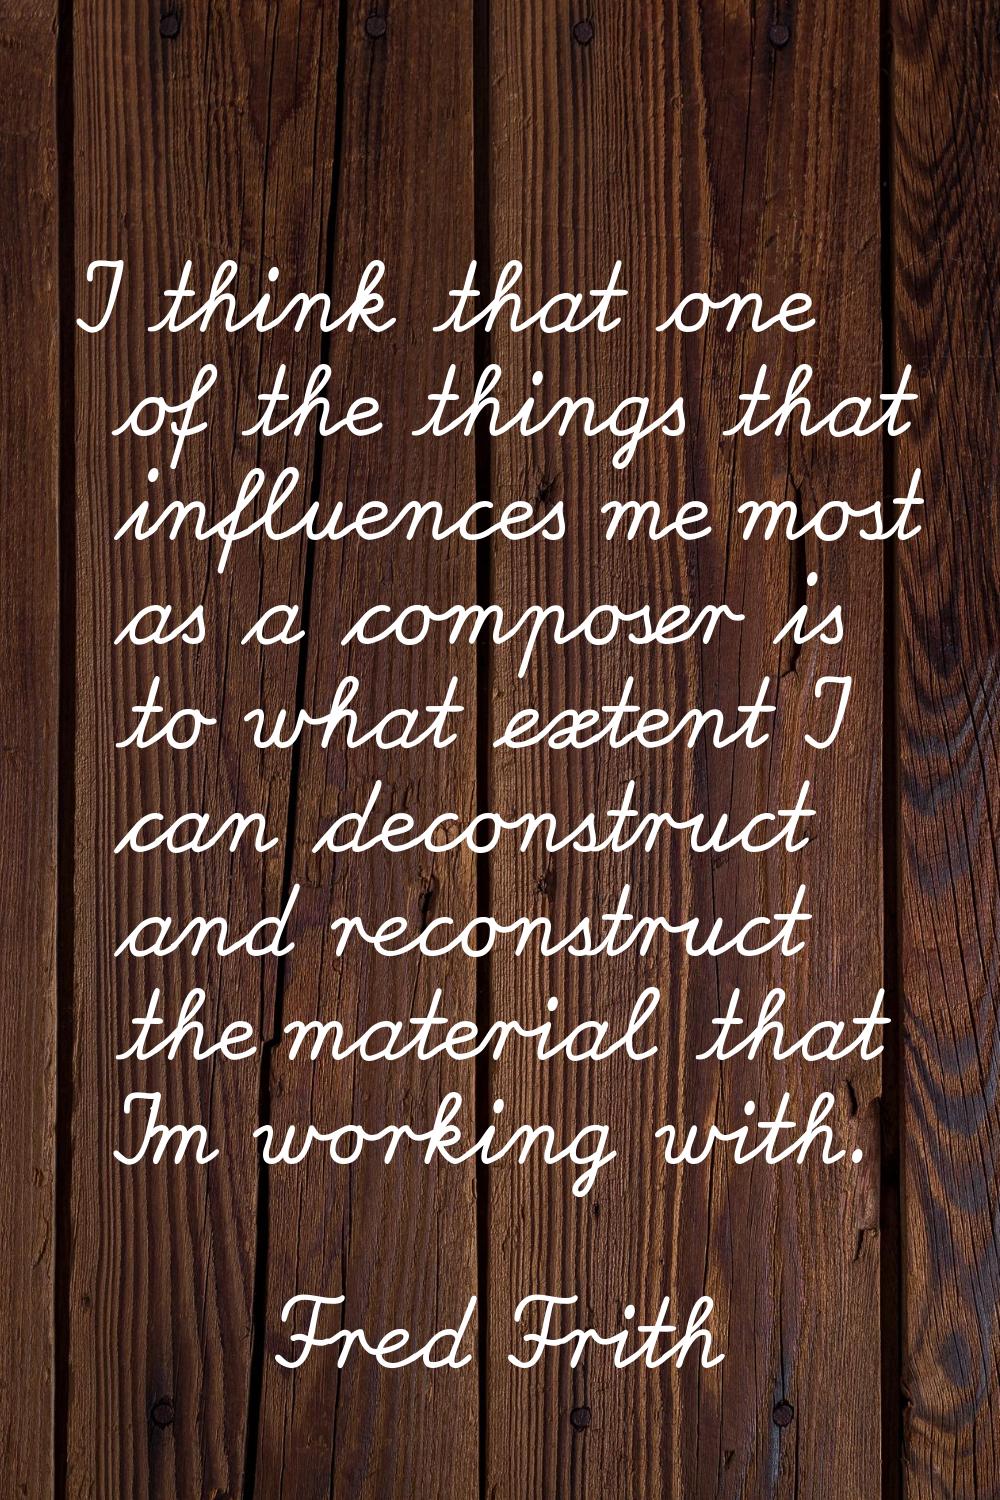 I think that one of the things that influences me most as a composer is to what extent I can decons